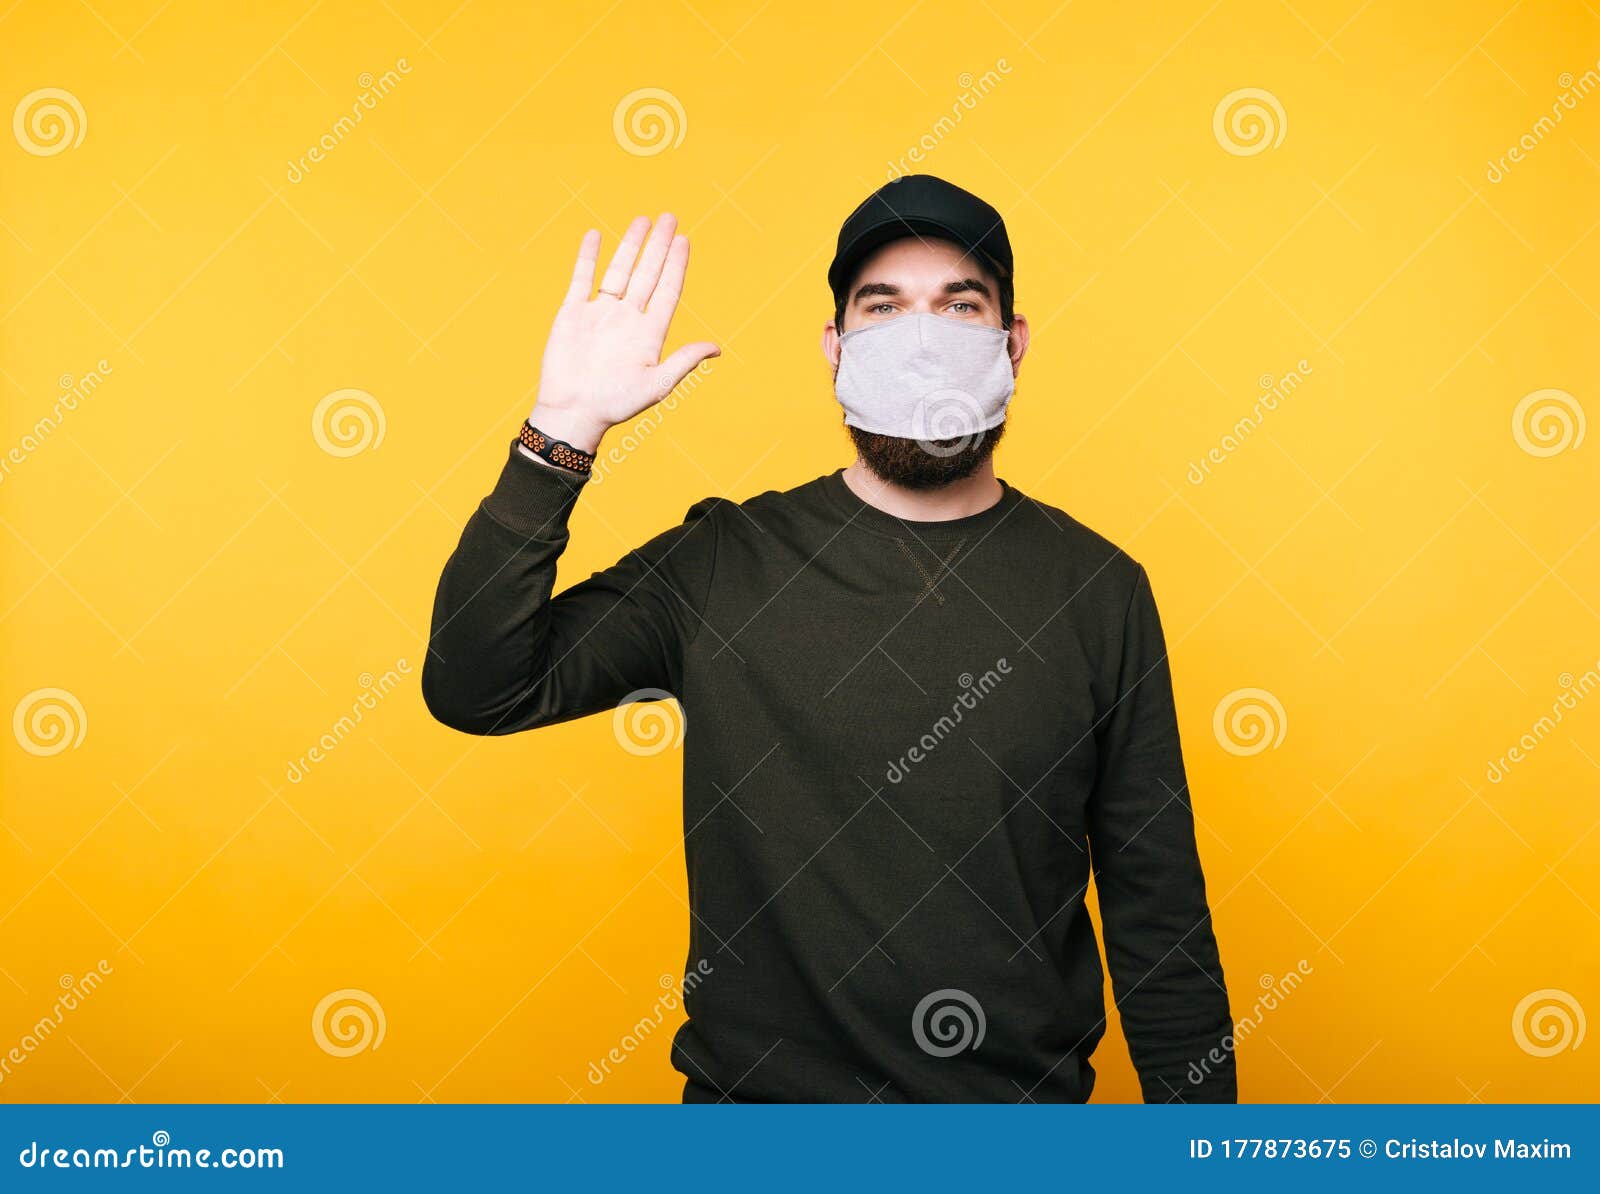 Download Young Man With Facial Mask Saying Hello Over Yellow Background Stock Image Image Of Gesture Male 177873675 PSD Mockup Templates